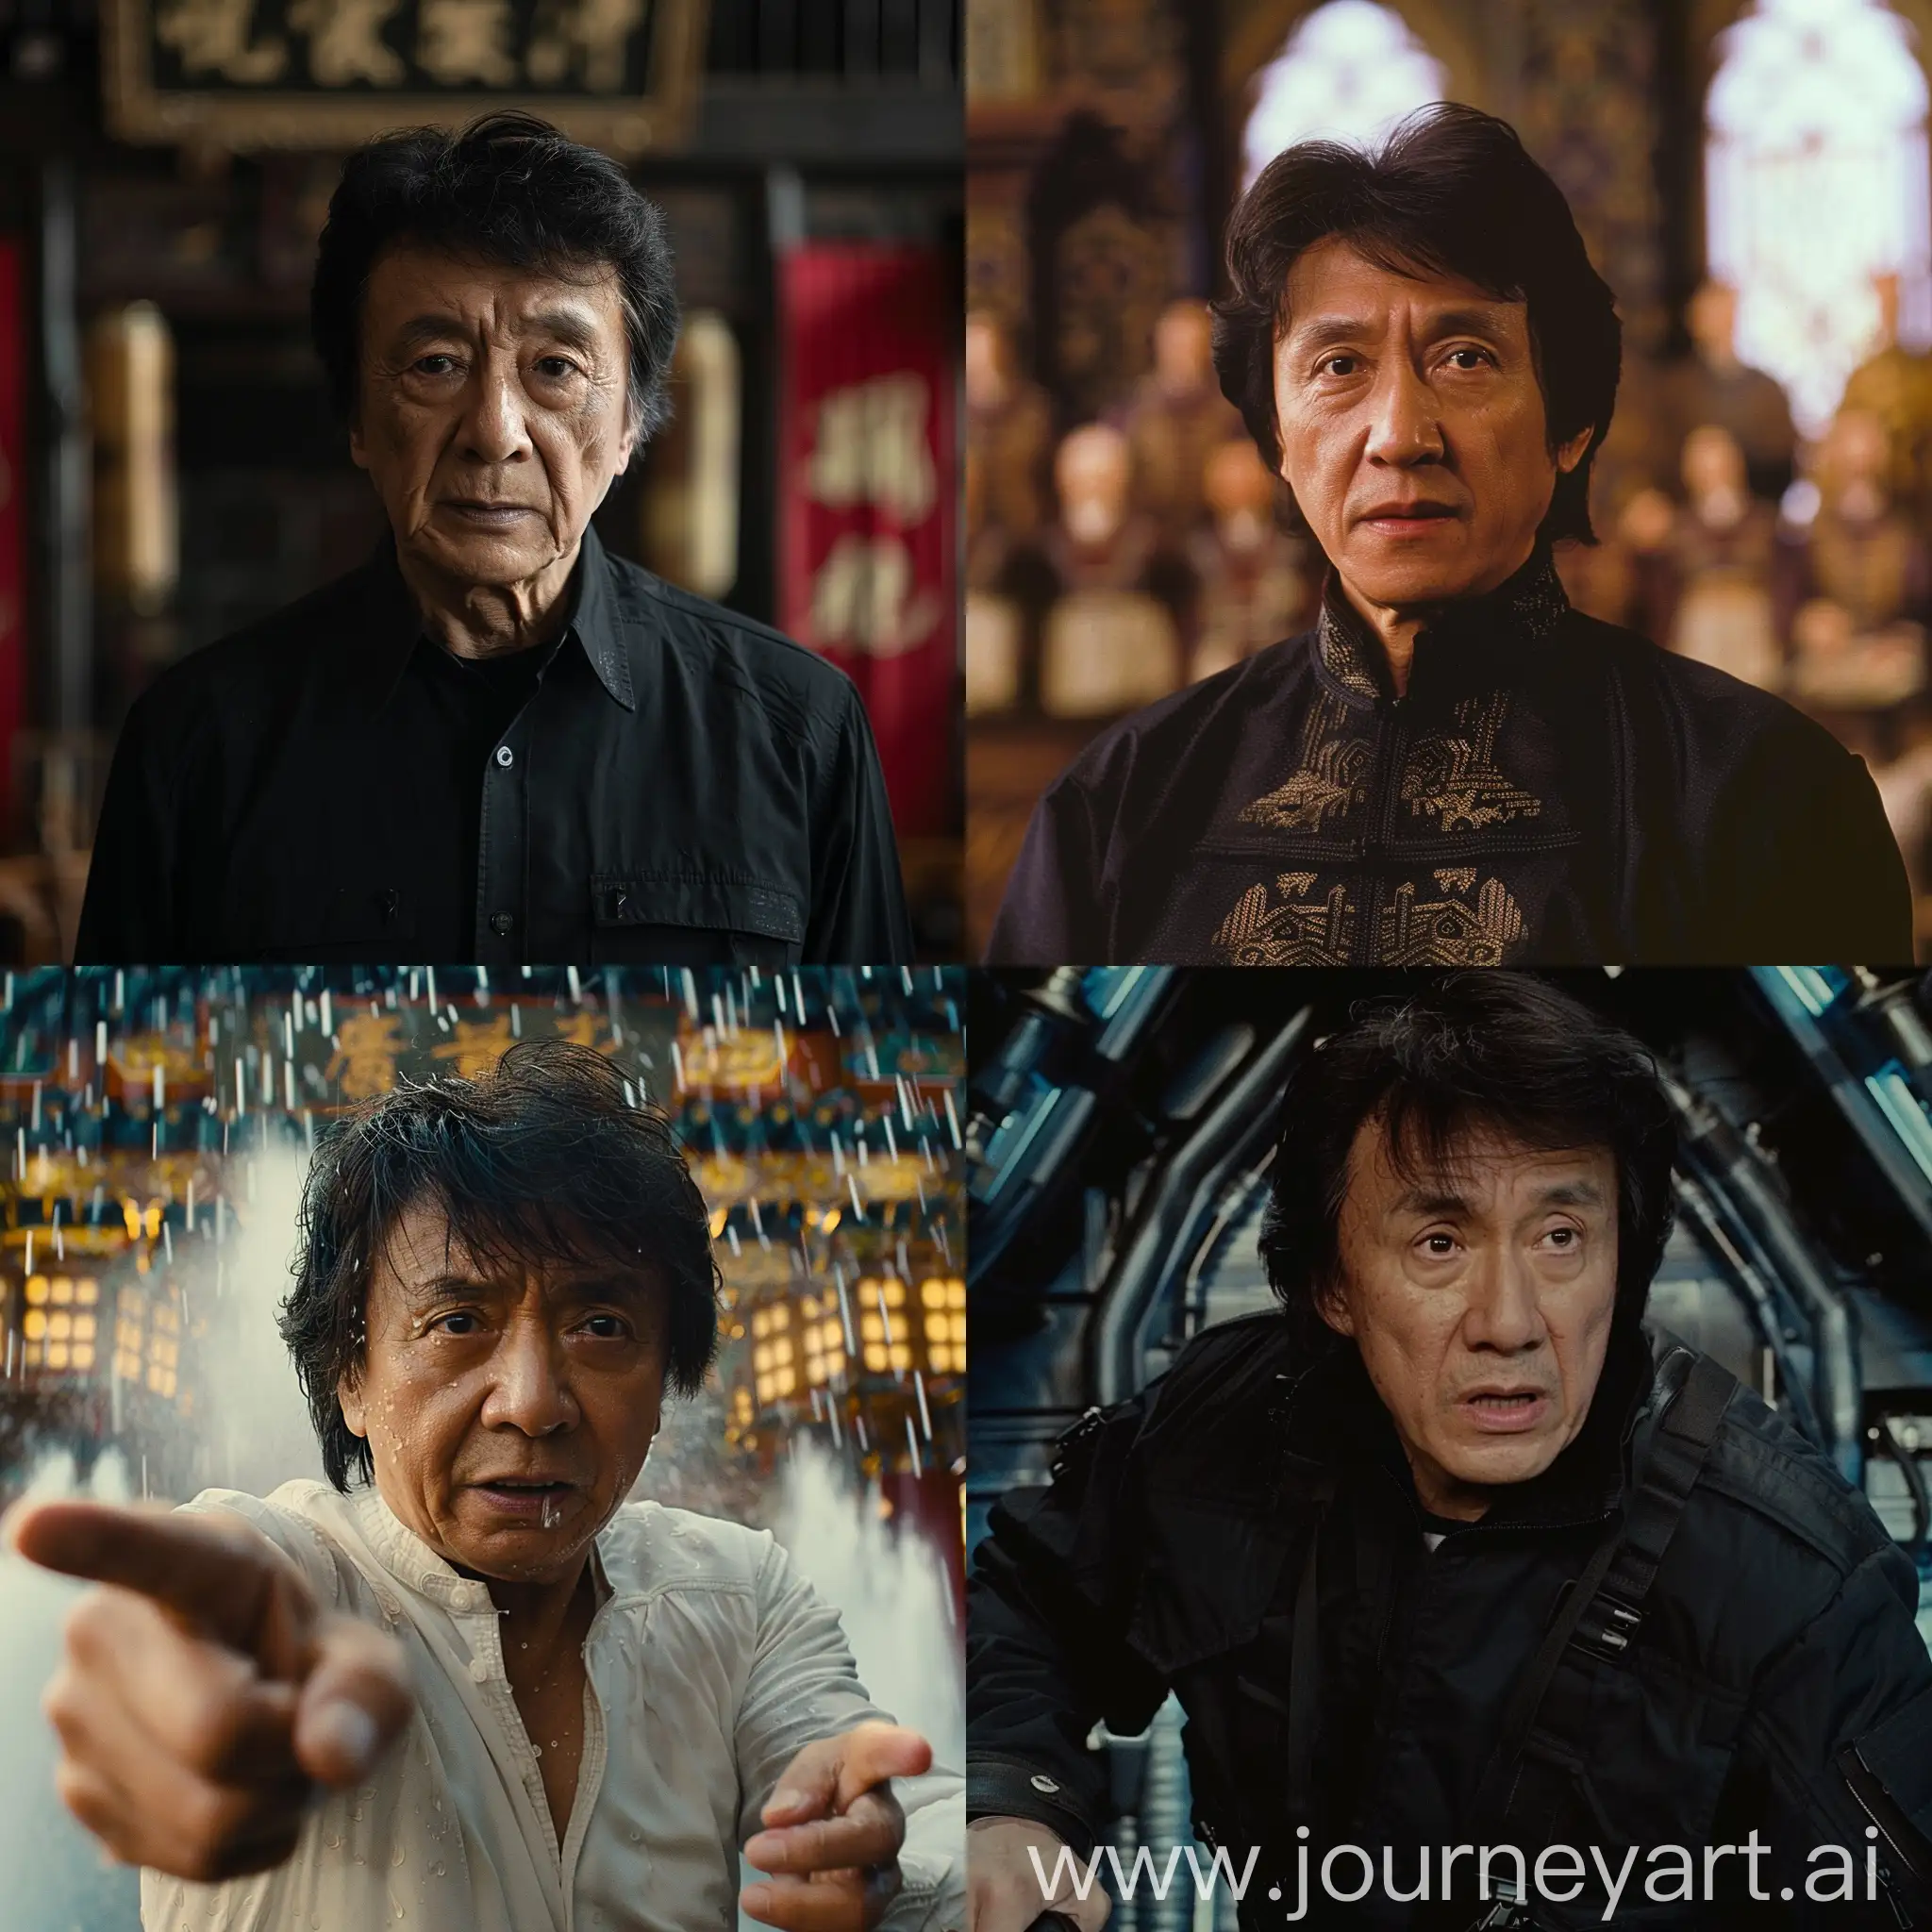 Jackie Chan in the movie Project A